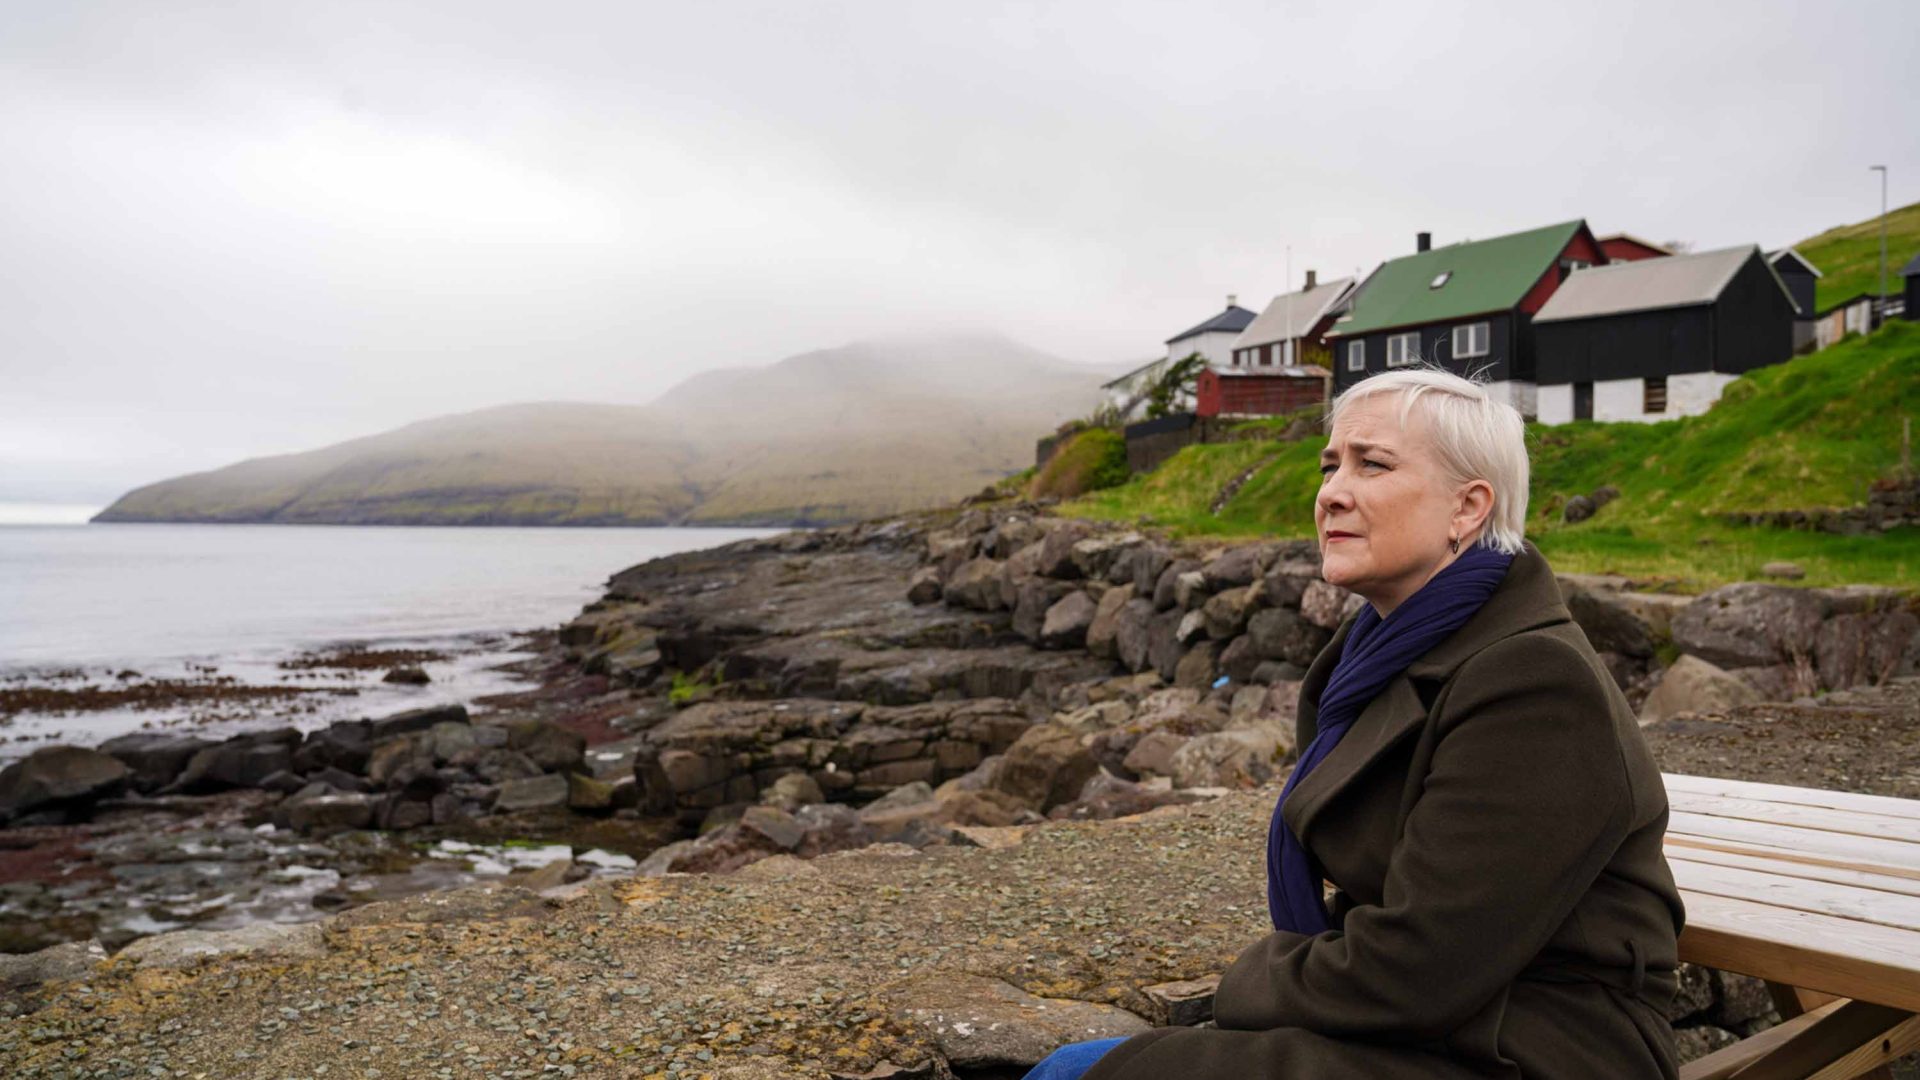 A woman with short blonde hair sits and looks out to sea.